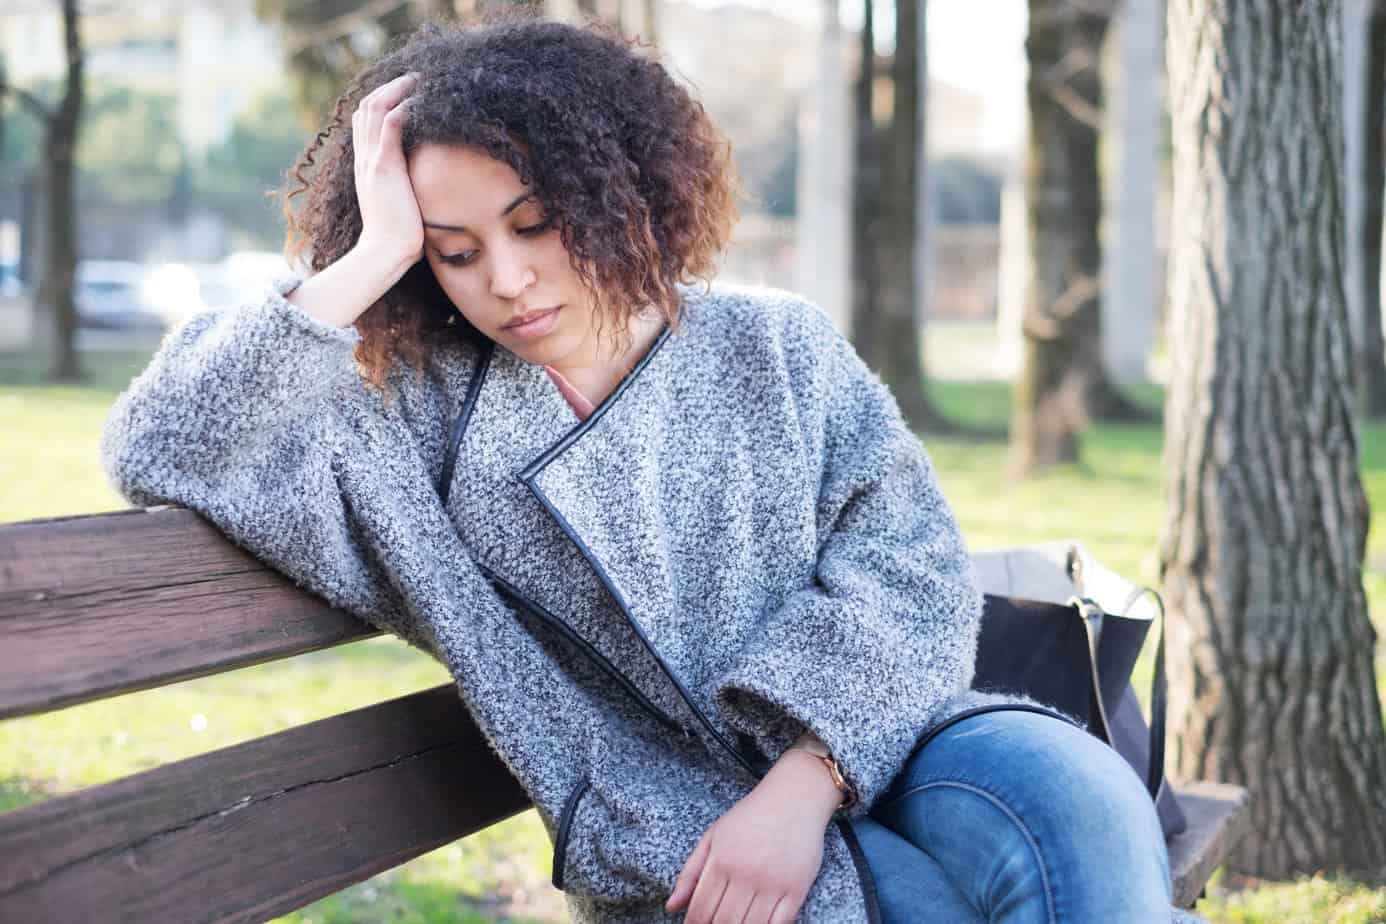 sad woman in coat seated on bench with head in hands